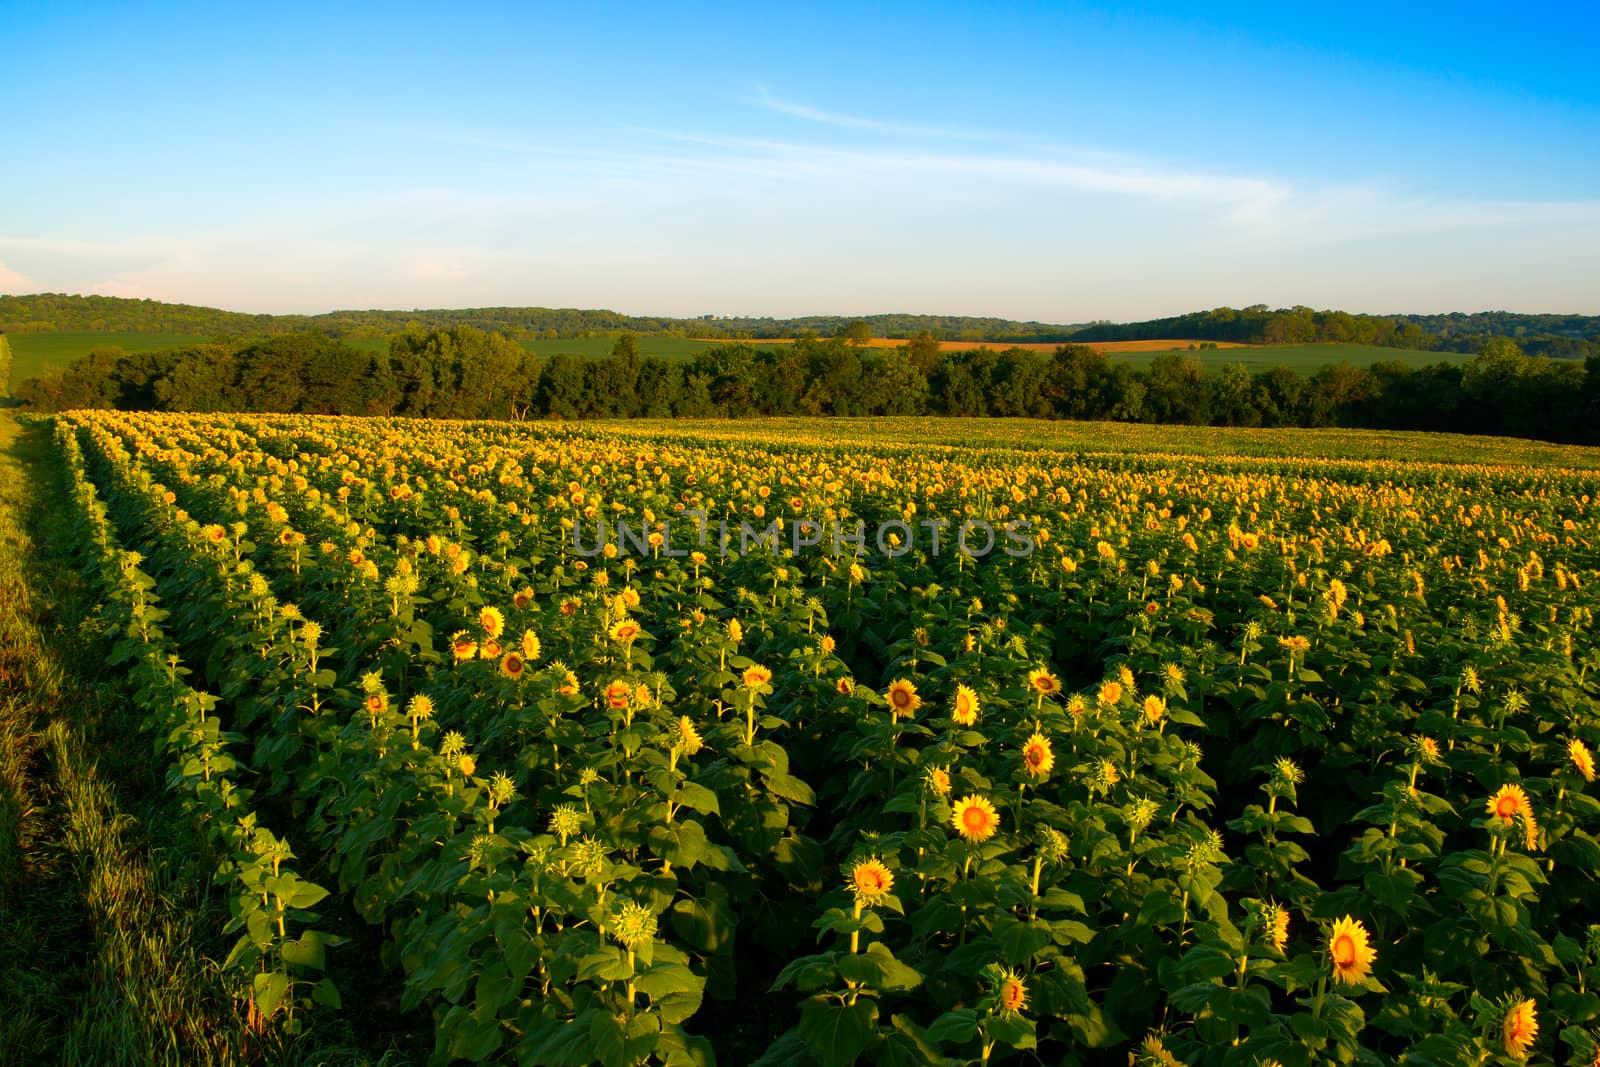 A horizontal view of a skyline over a sunflower field in the midwest